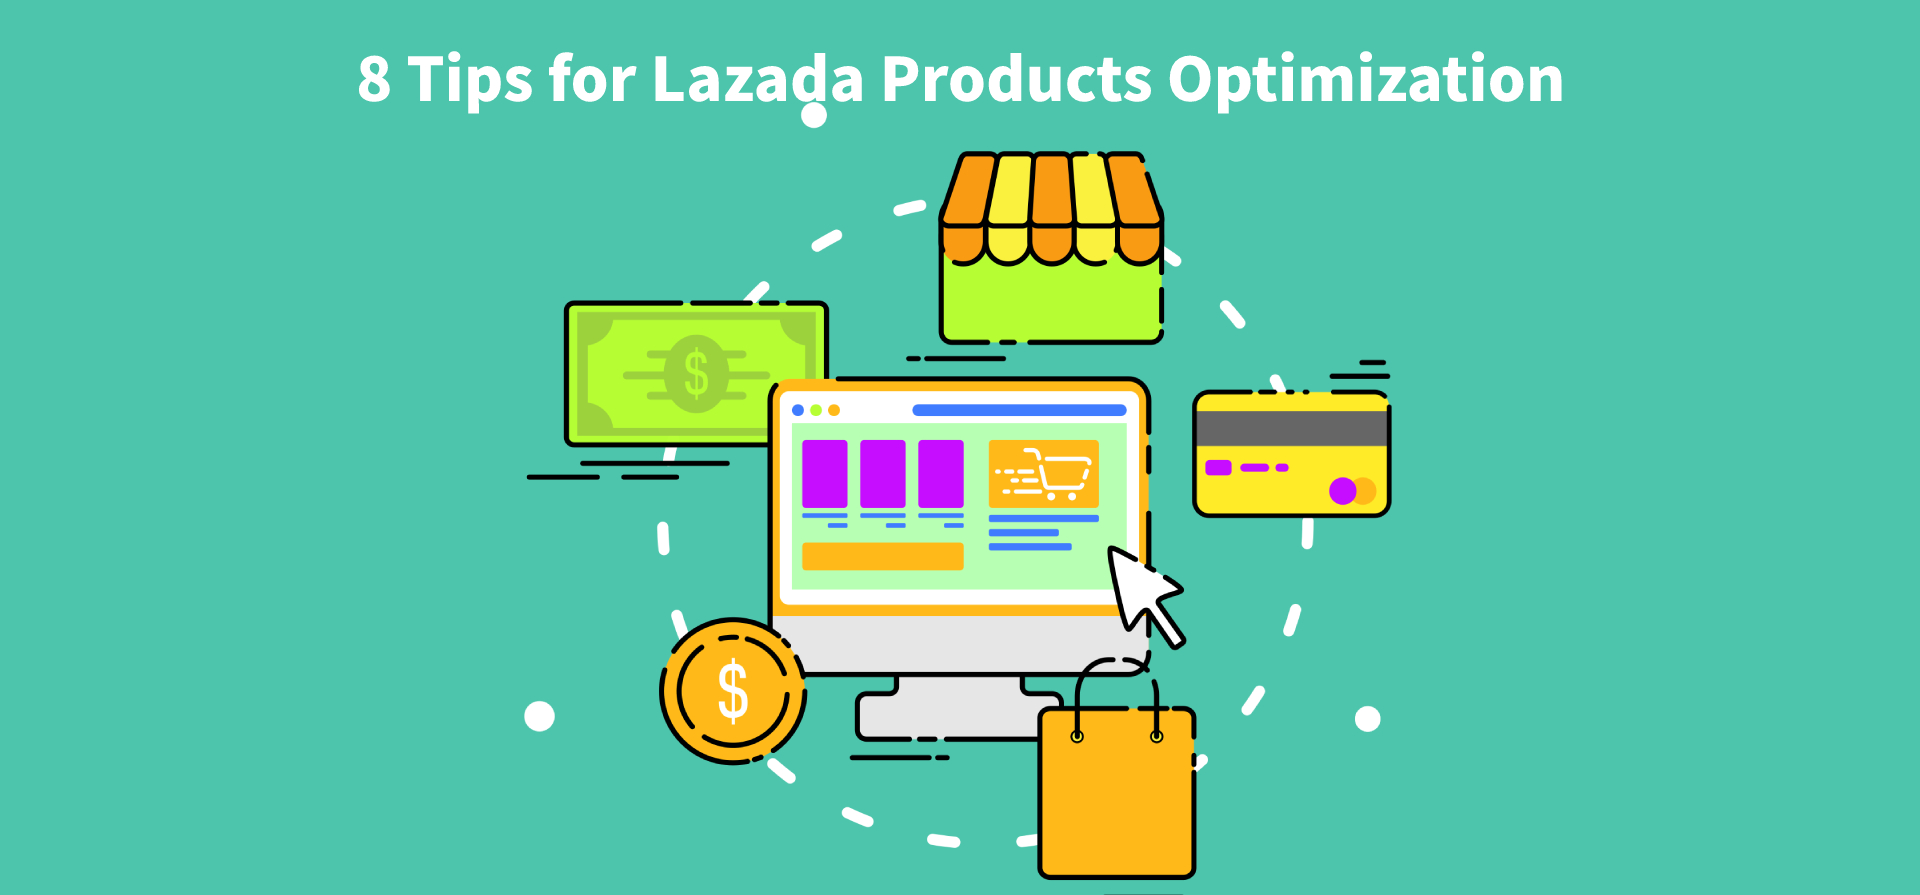 8 Tips for Lazada Products Optimization